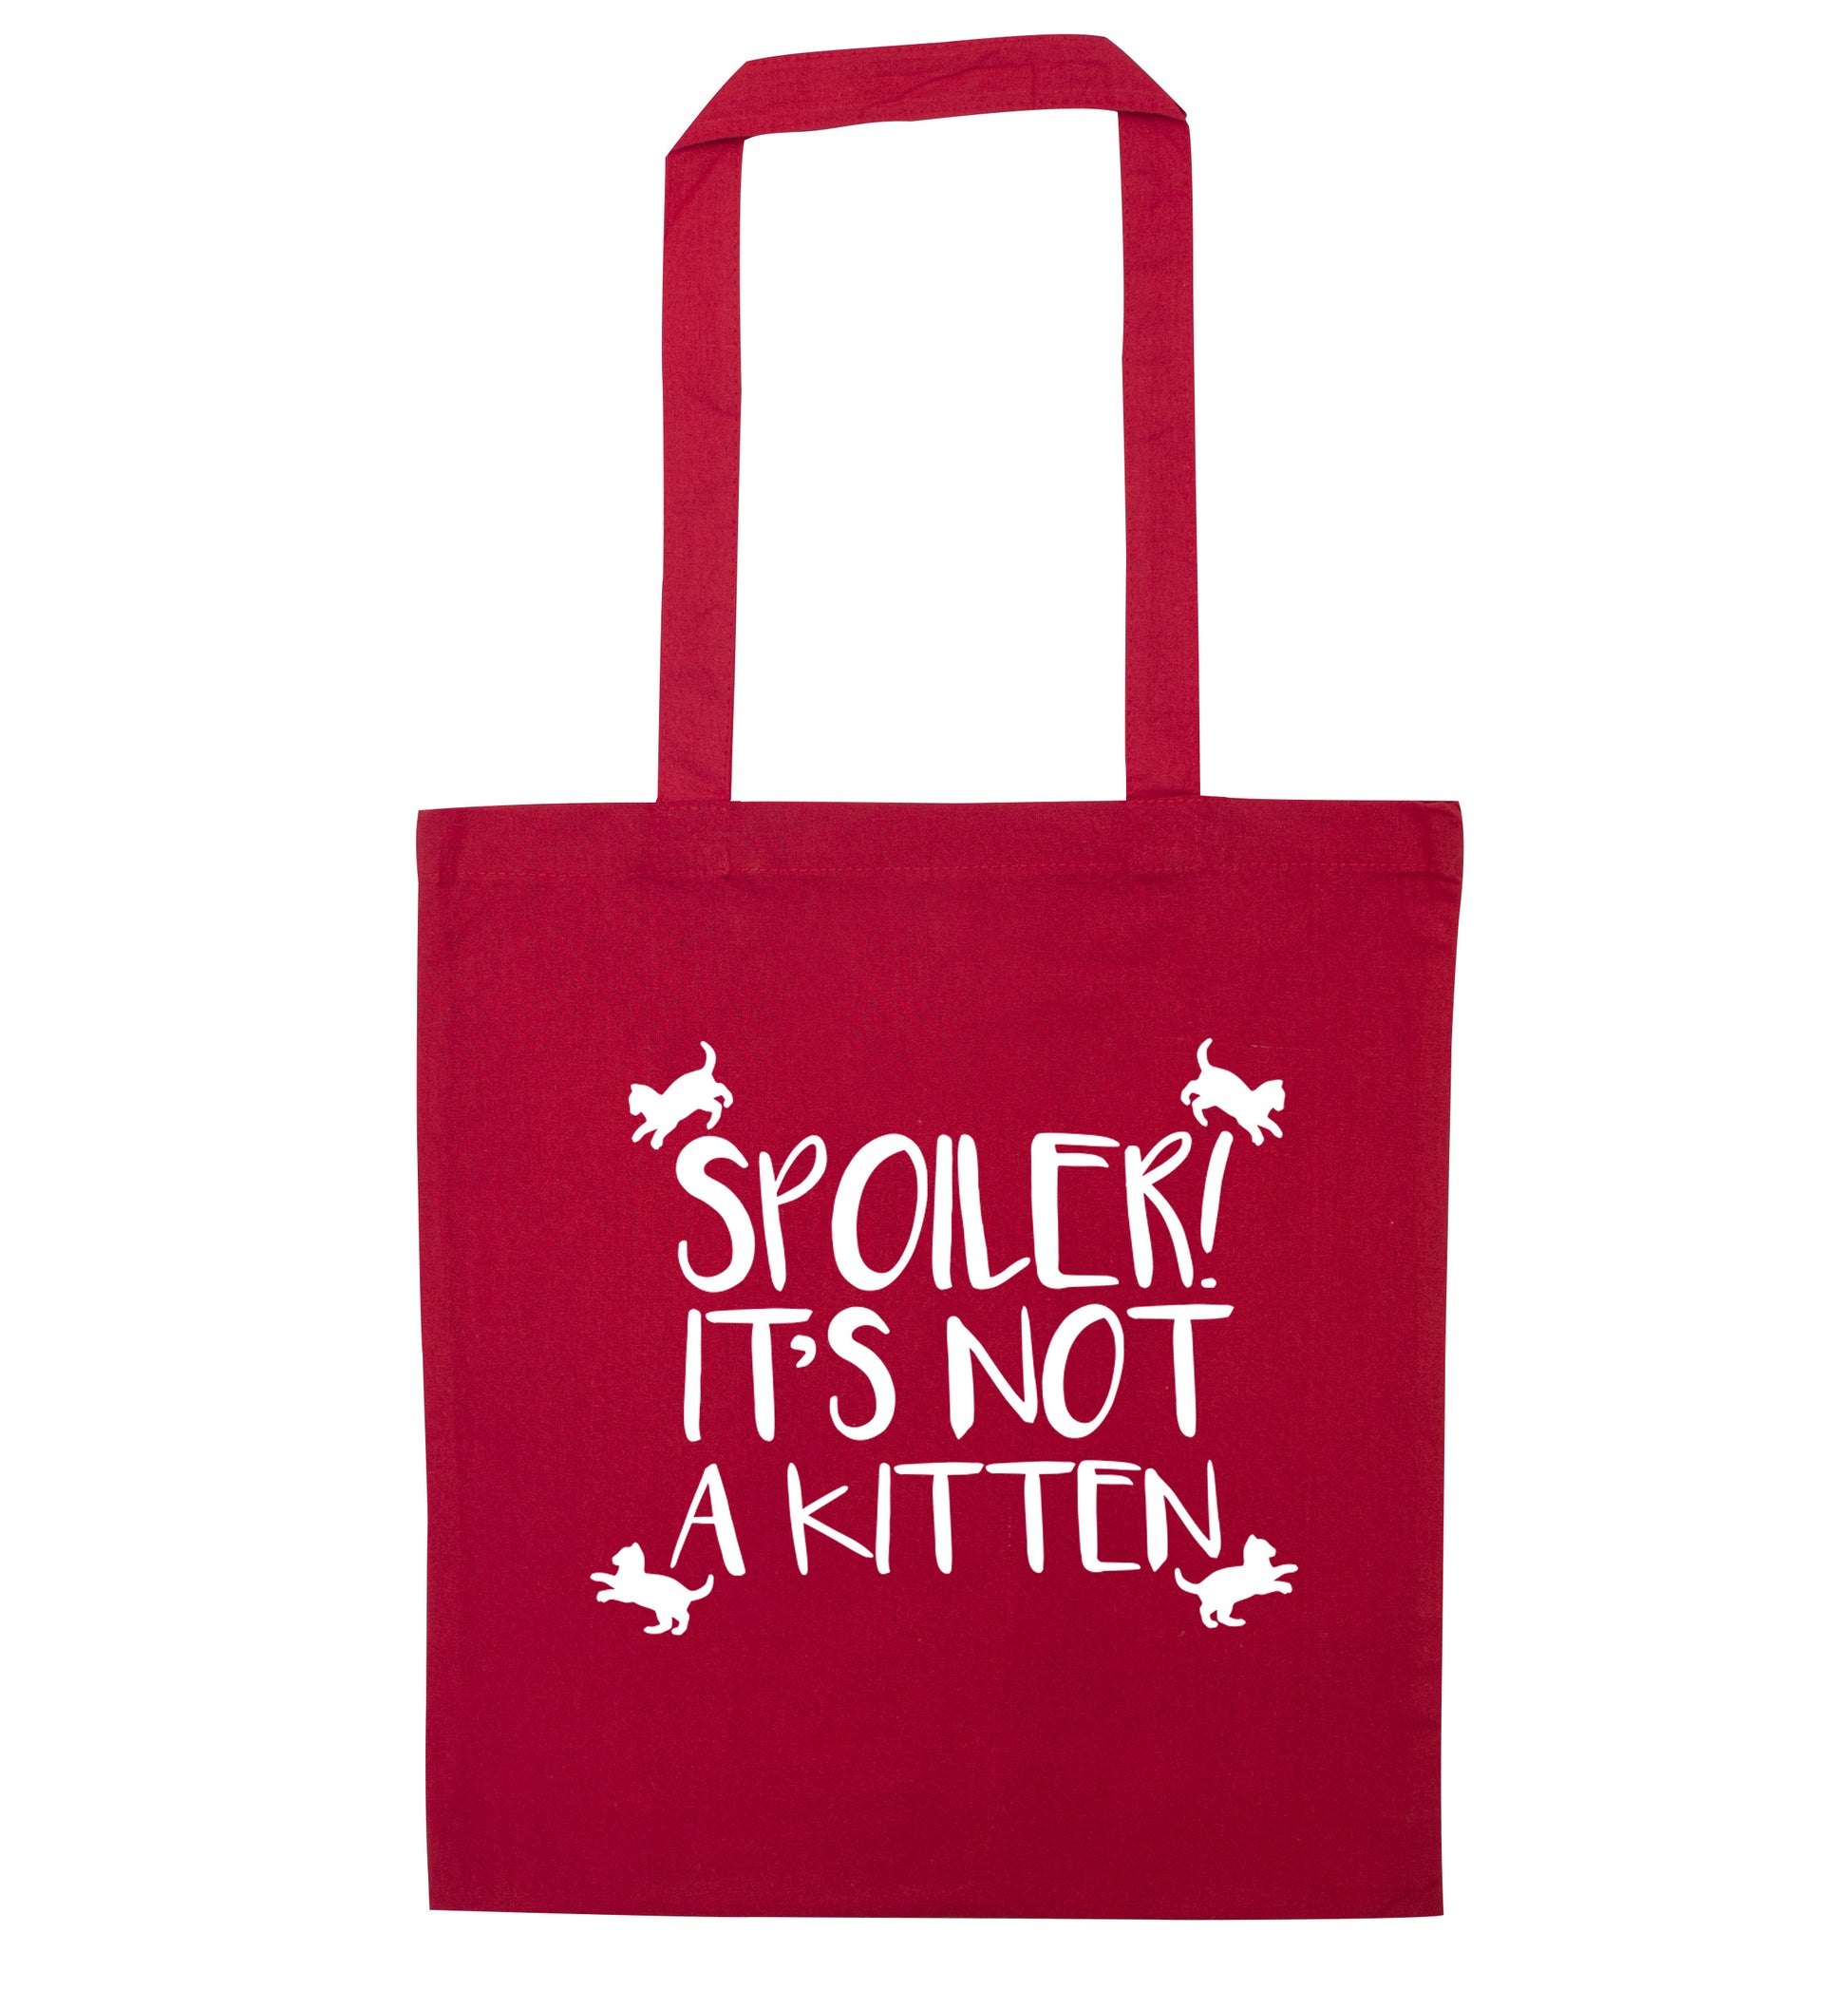 Spoiler it's not a kitten red tote bag